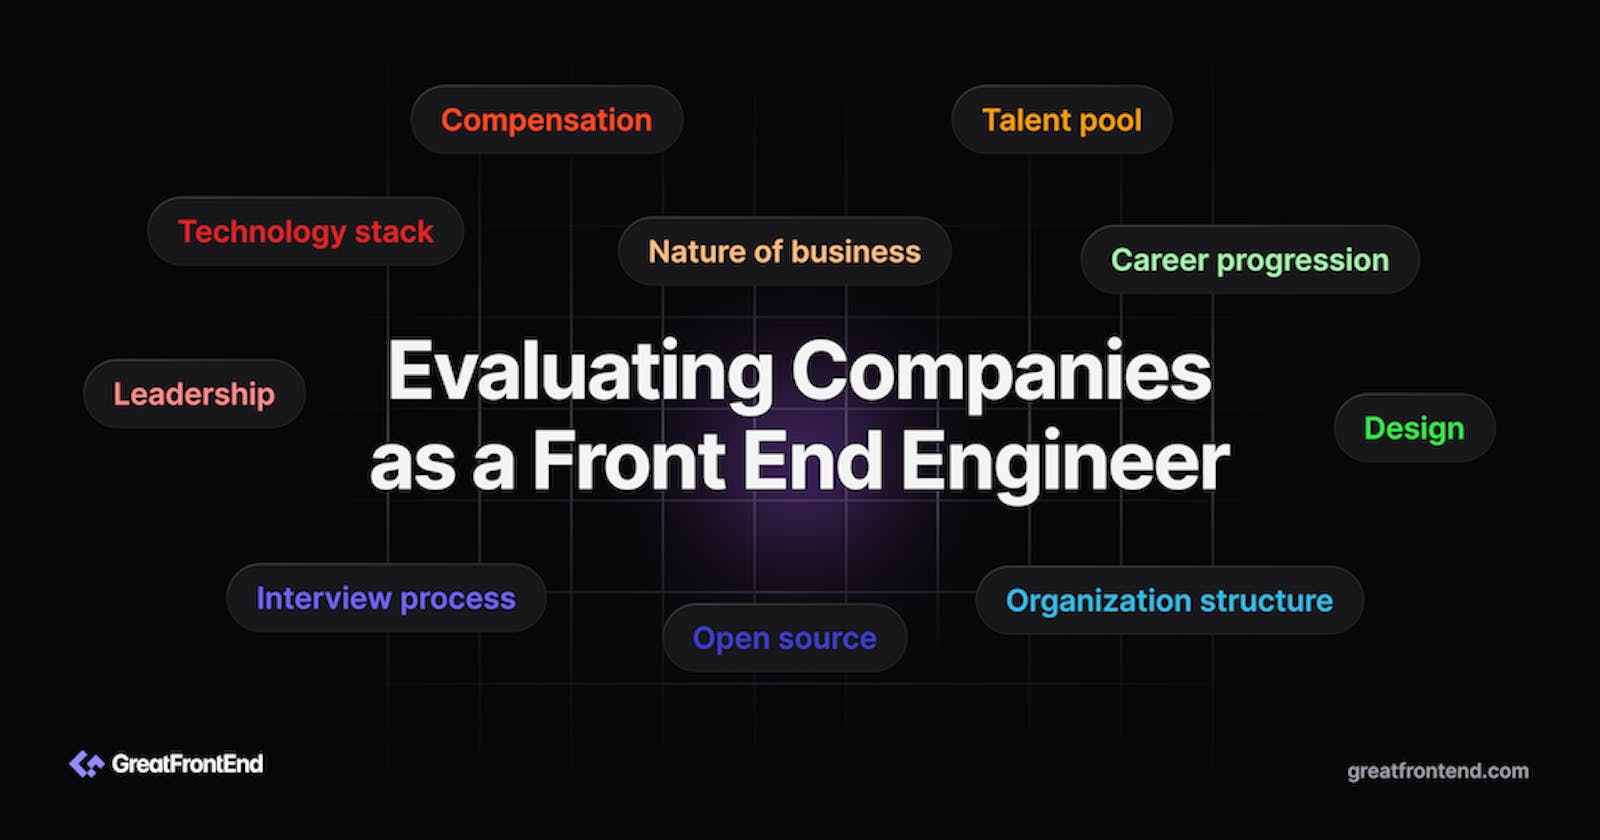 How to Evaluate Companies as a Front End Engineer